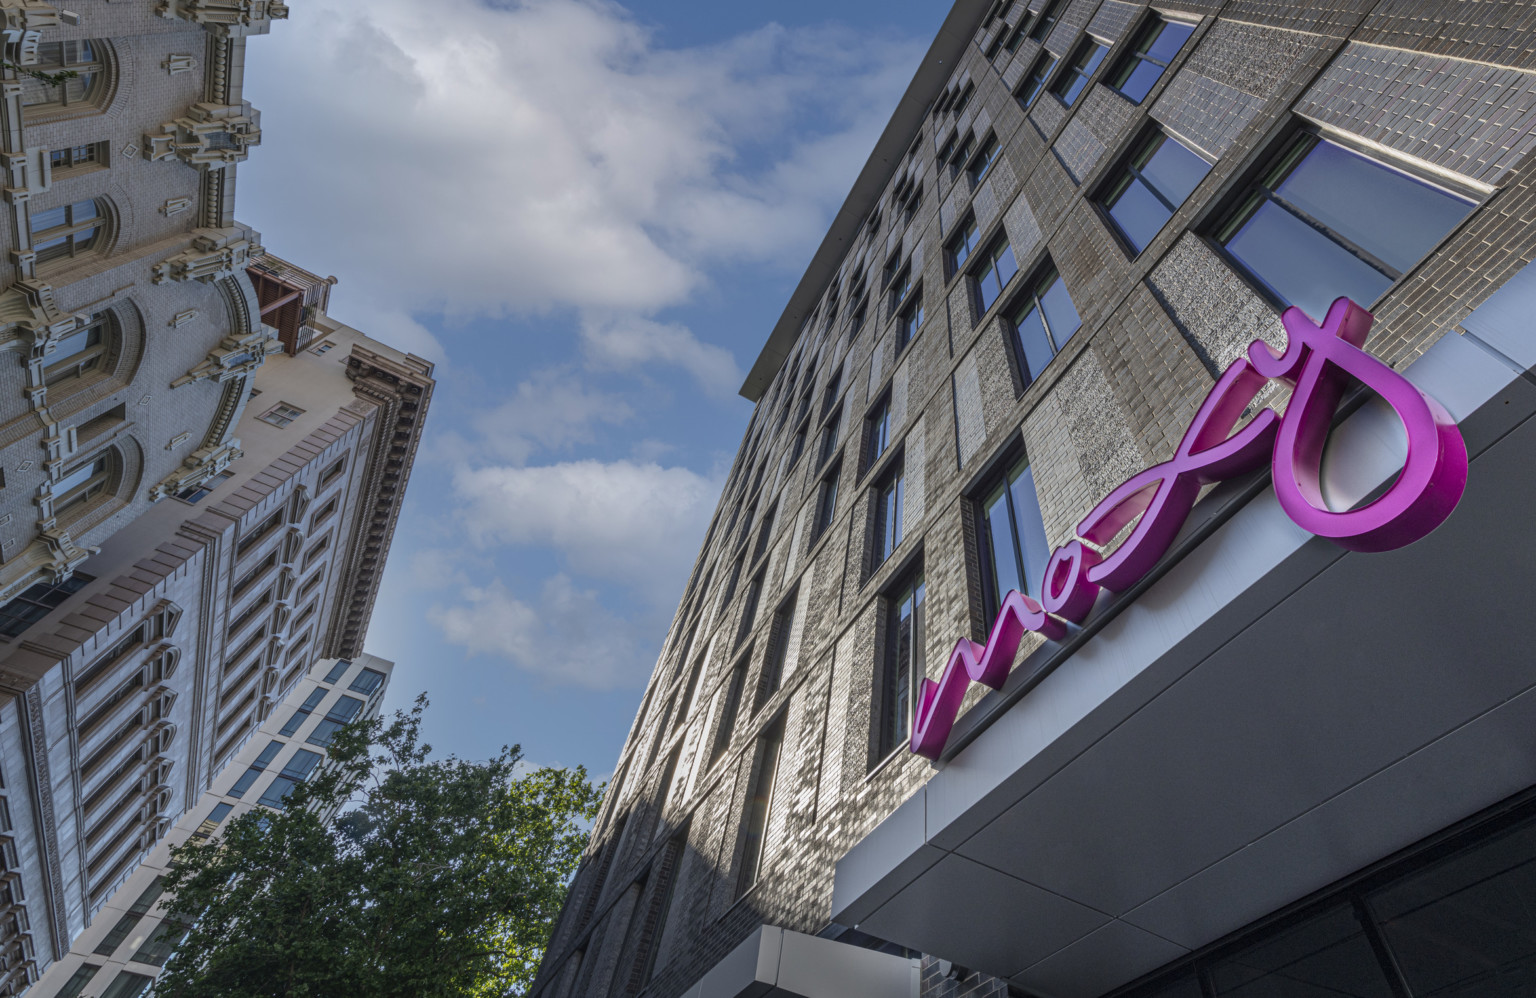 The Moxy Hotel in downtown Portland exterior view looking upwards from the ground at stone building with pink script sign